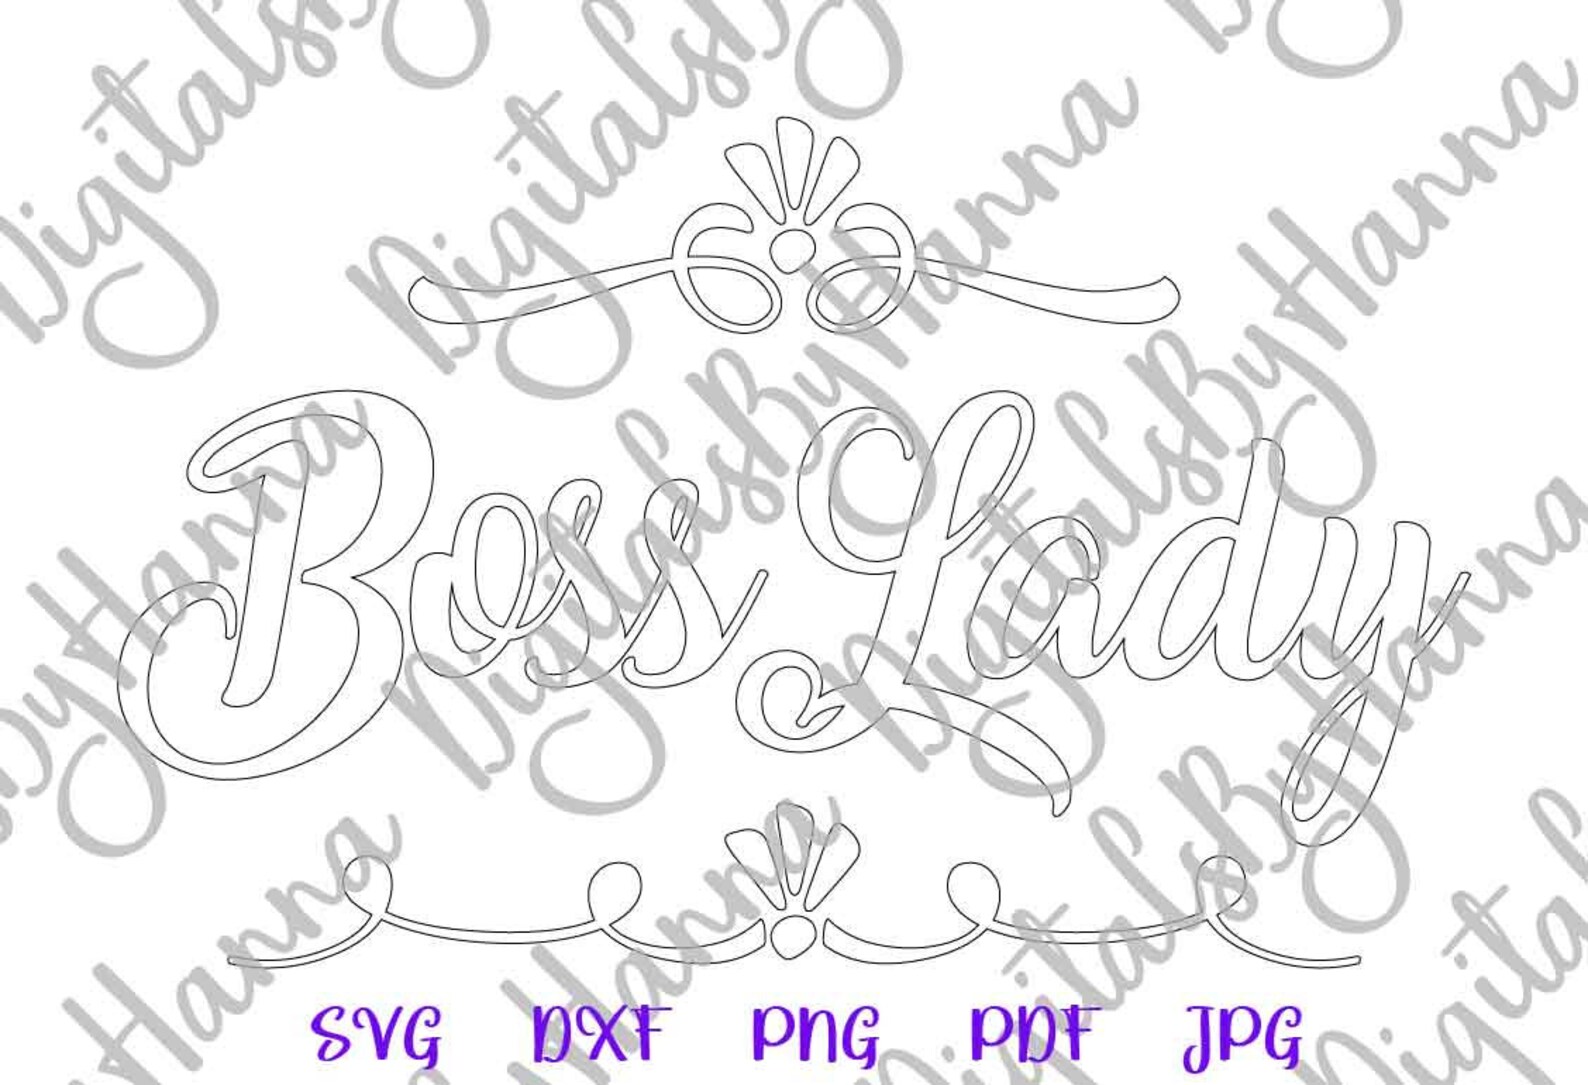 Office SVG Files for Cricut Sayings Boss Lady SVG Work Wife - Etsy